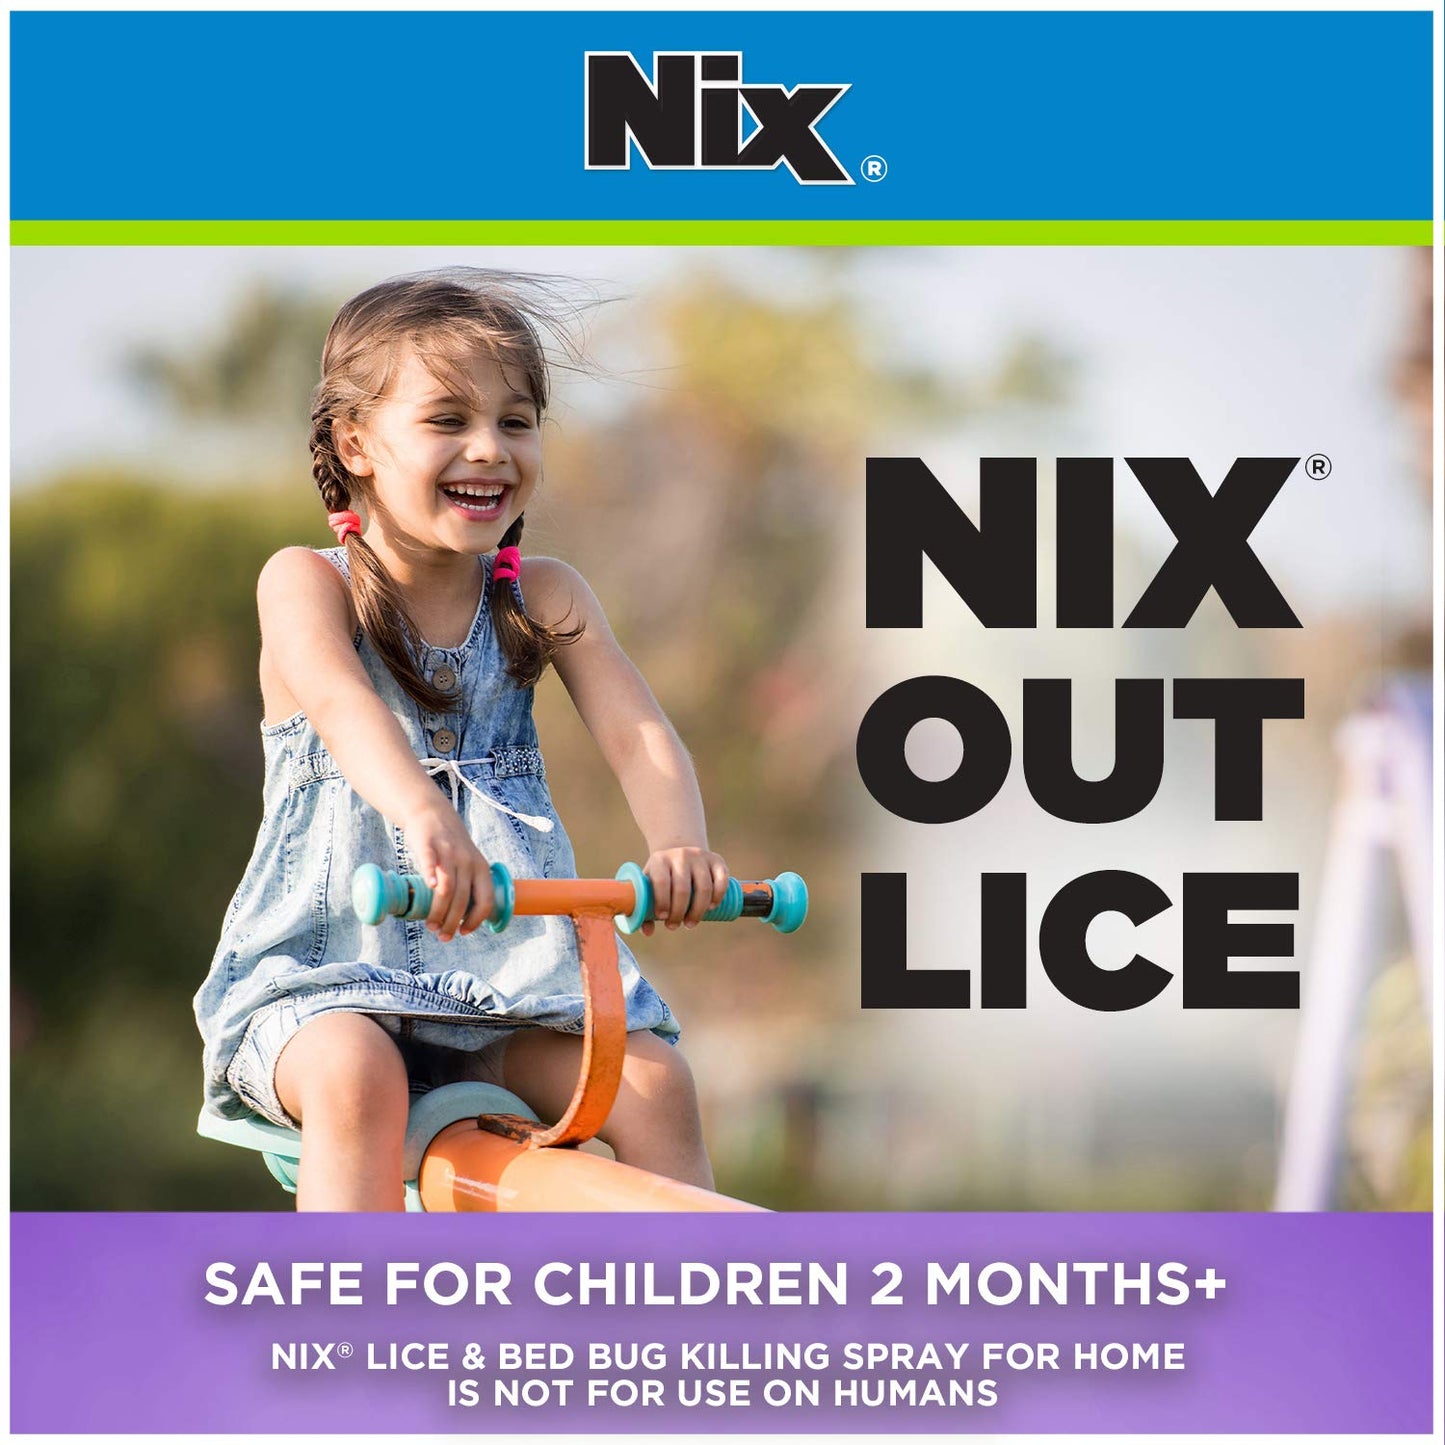 Nix Complete Lice Elimination Kit | Maximum Strength | Kills Lice and Eggs While Preventing Re-Infestation | Includes Creme Rinse, Combing Gel, and Nit Removal Comb - Amazon Vine